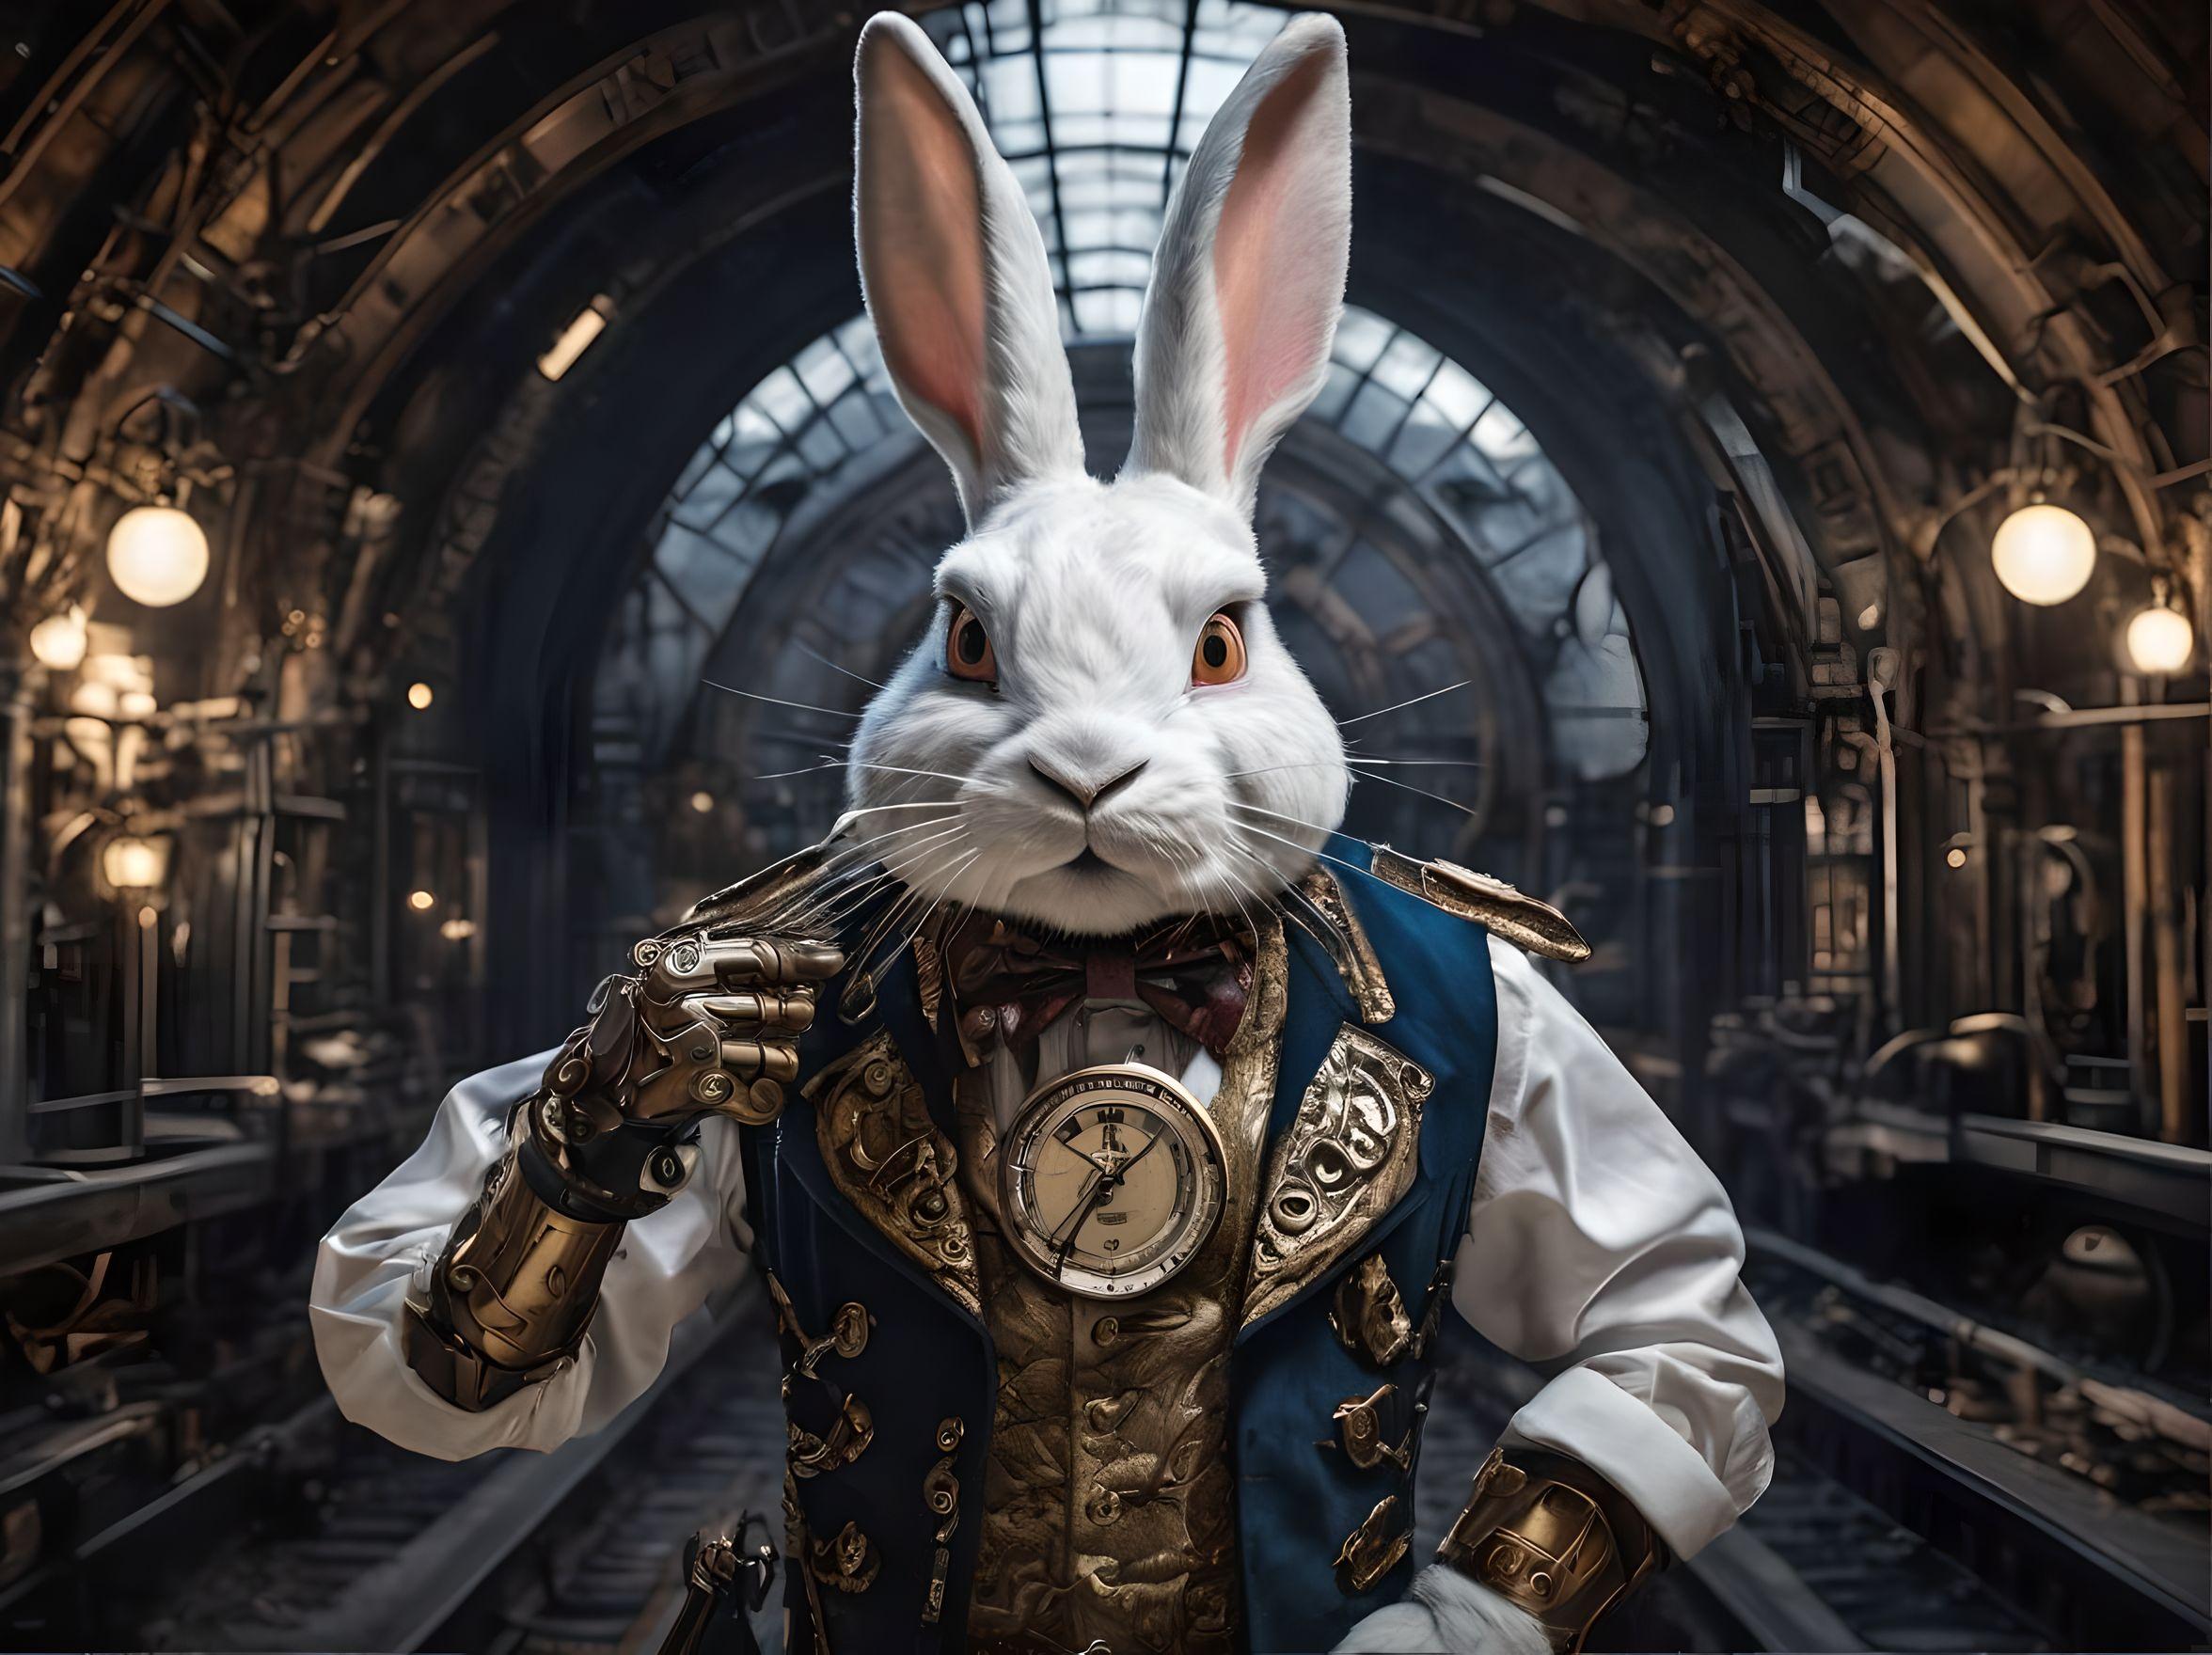 epic hyperrealistic photo::re-imagination of (white rabbit from Alice in Wonderland)- mechanical left eyeball- clockwork rabbit ears::2 portrayed as steampunk characters- mechanized design- highly detailed- I can't believe how beautiful- detailed stylization: in the style of steampunk influences- john wilhelm- realistic yet stylized- meticulously detailed- glowing lights- evil train- midnight- train station- extremely detailed- intricate clothing design- close to camera symmetrical expansive landscapes- 8k resolution steampunk outfit and weapon- intricate design and details- dramatic lighting- high detail